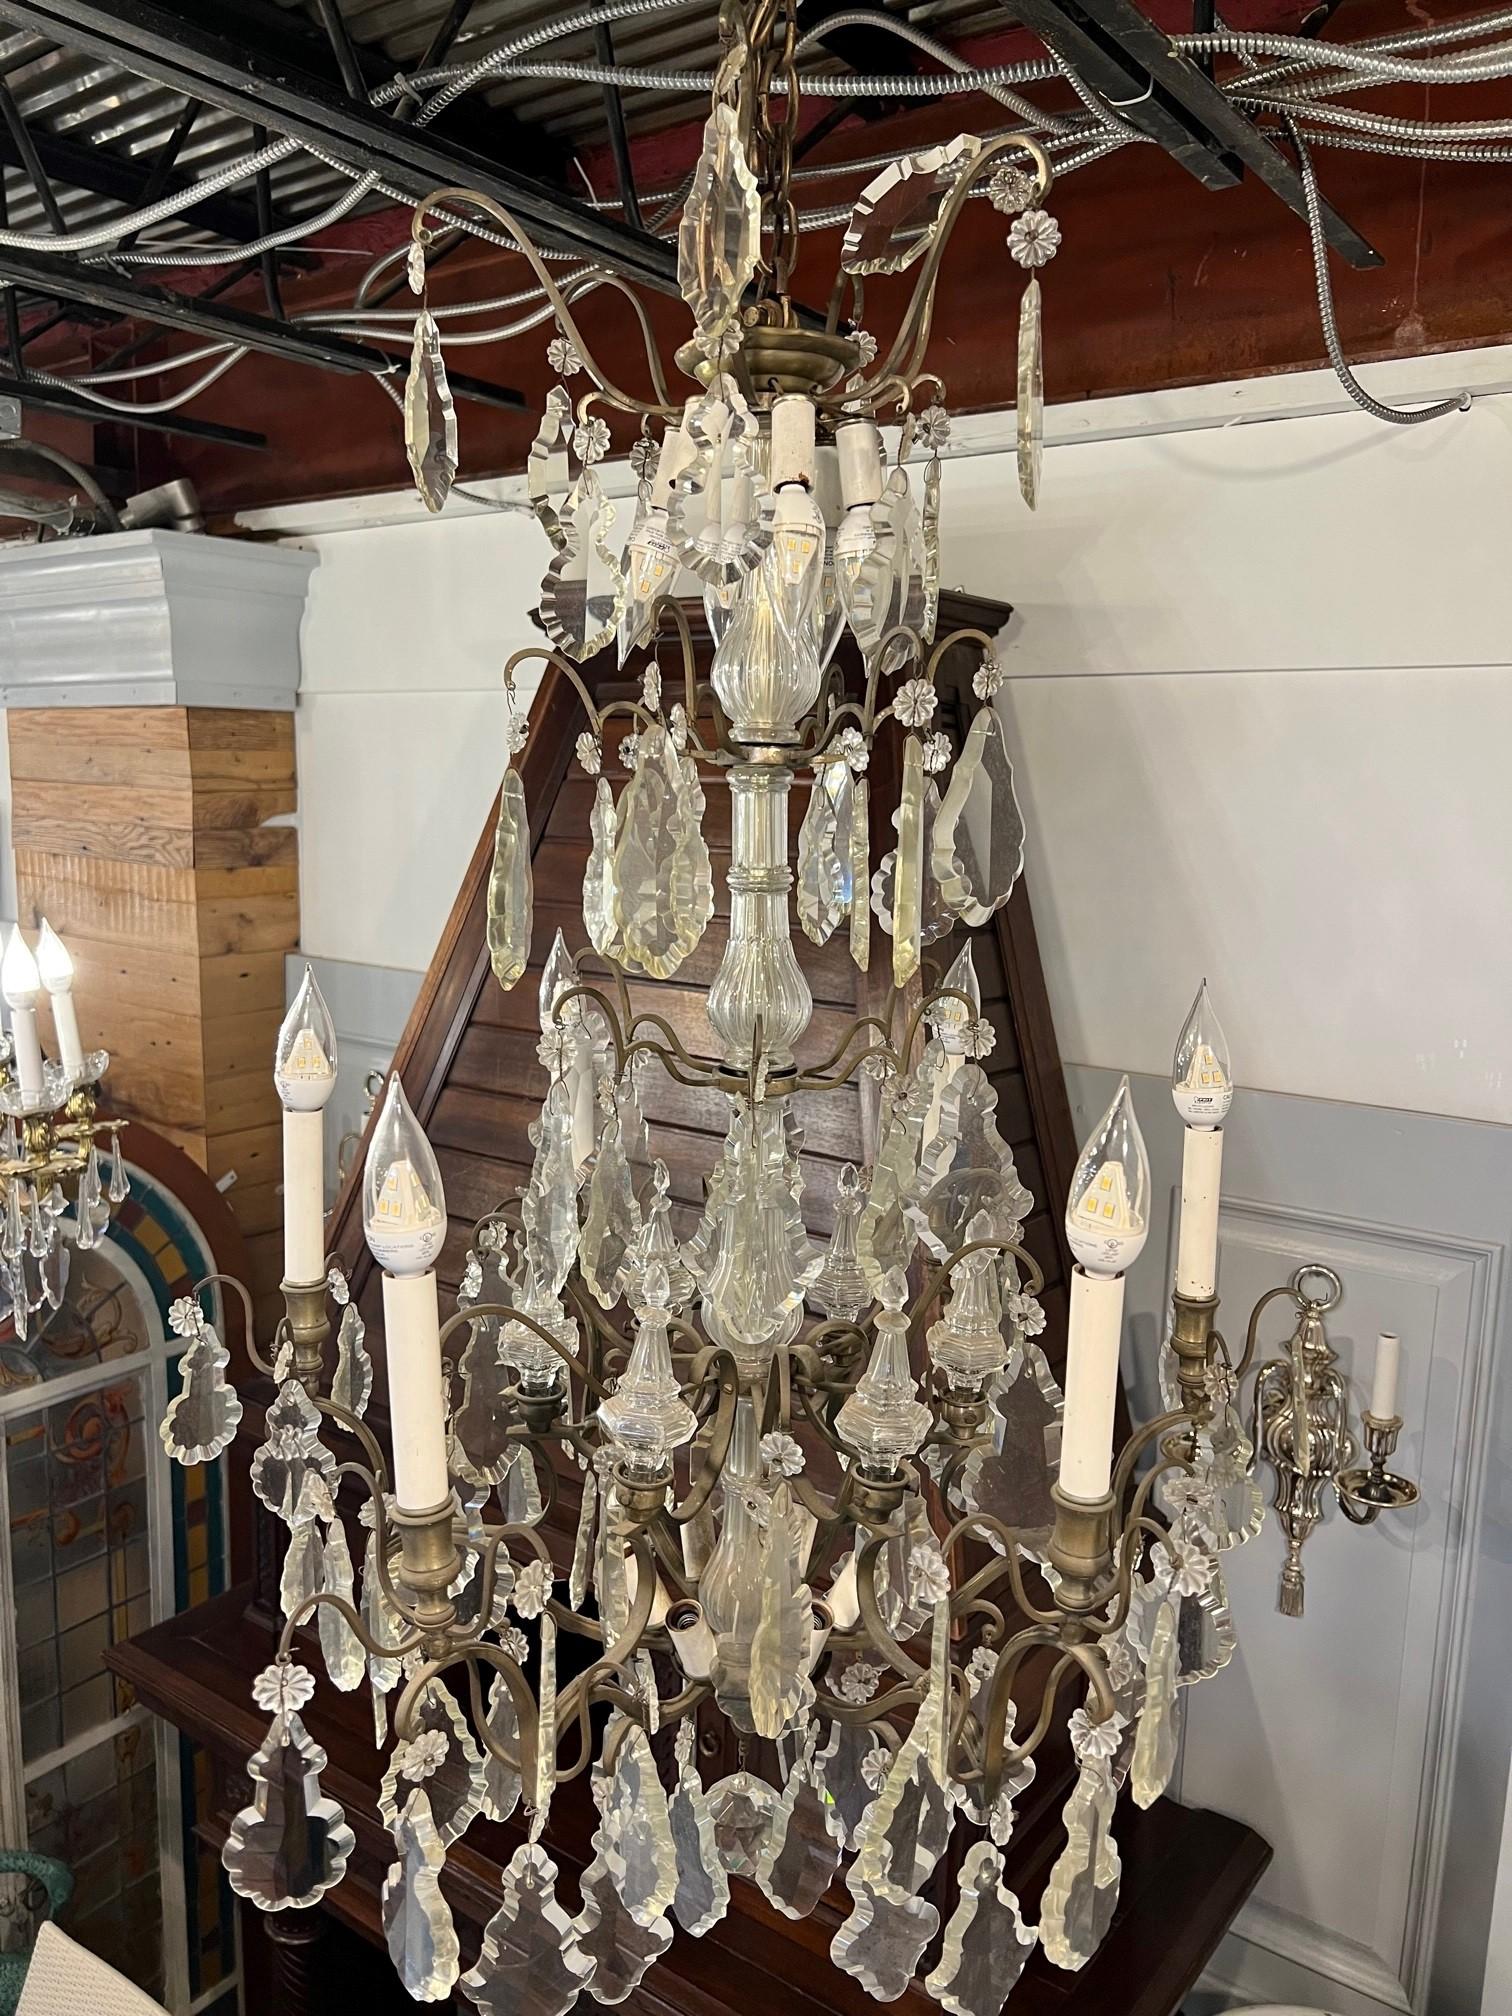 Beautiful antique crystal chandelier made in France. Delicate brass scrollwork is embellished with many different shaped cut crystals and elaborate crystal finals. The chandelier has six arms with candelabra lights and also six lights above and